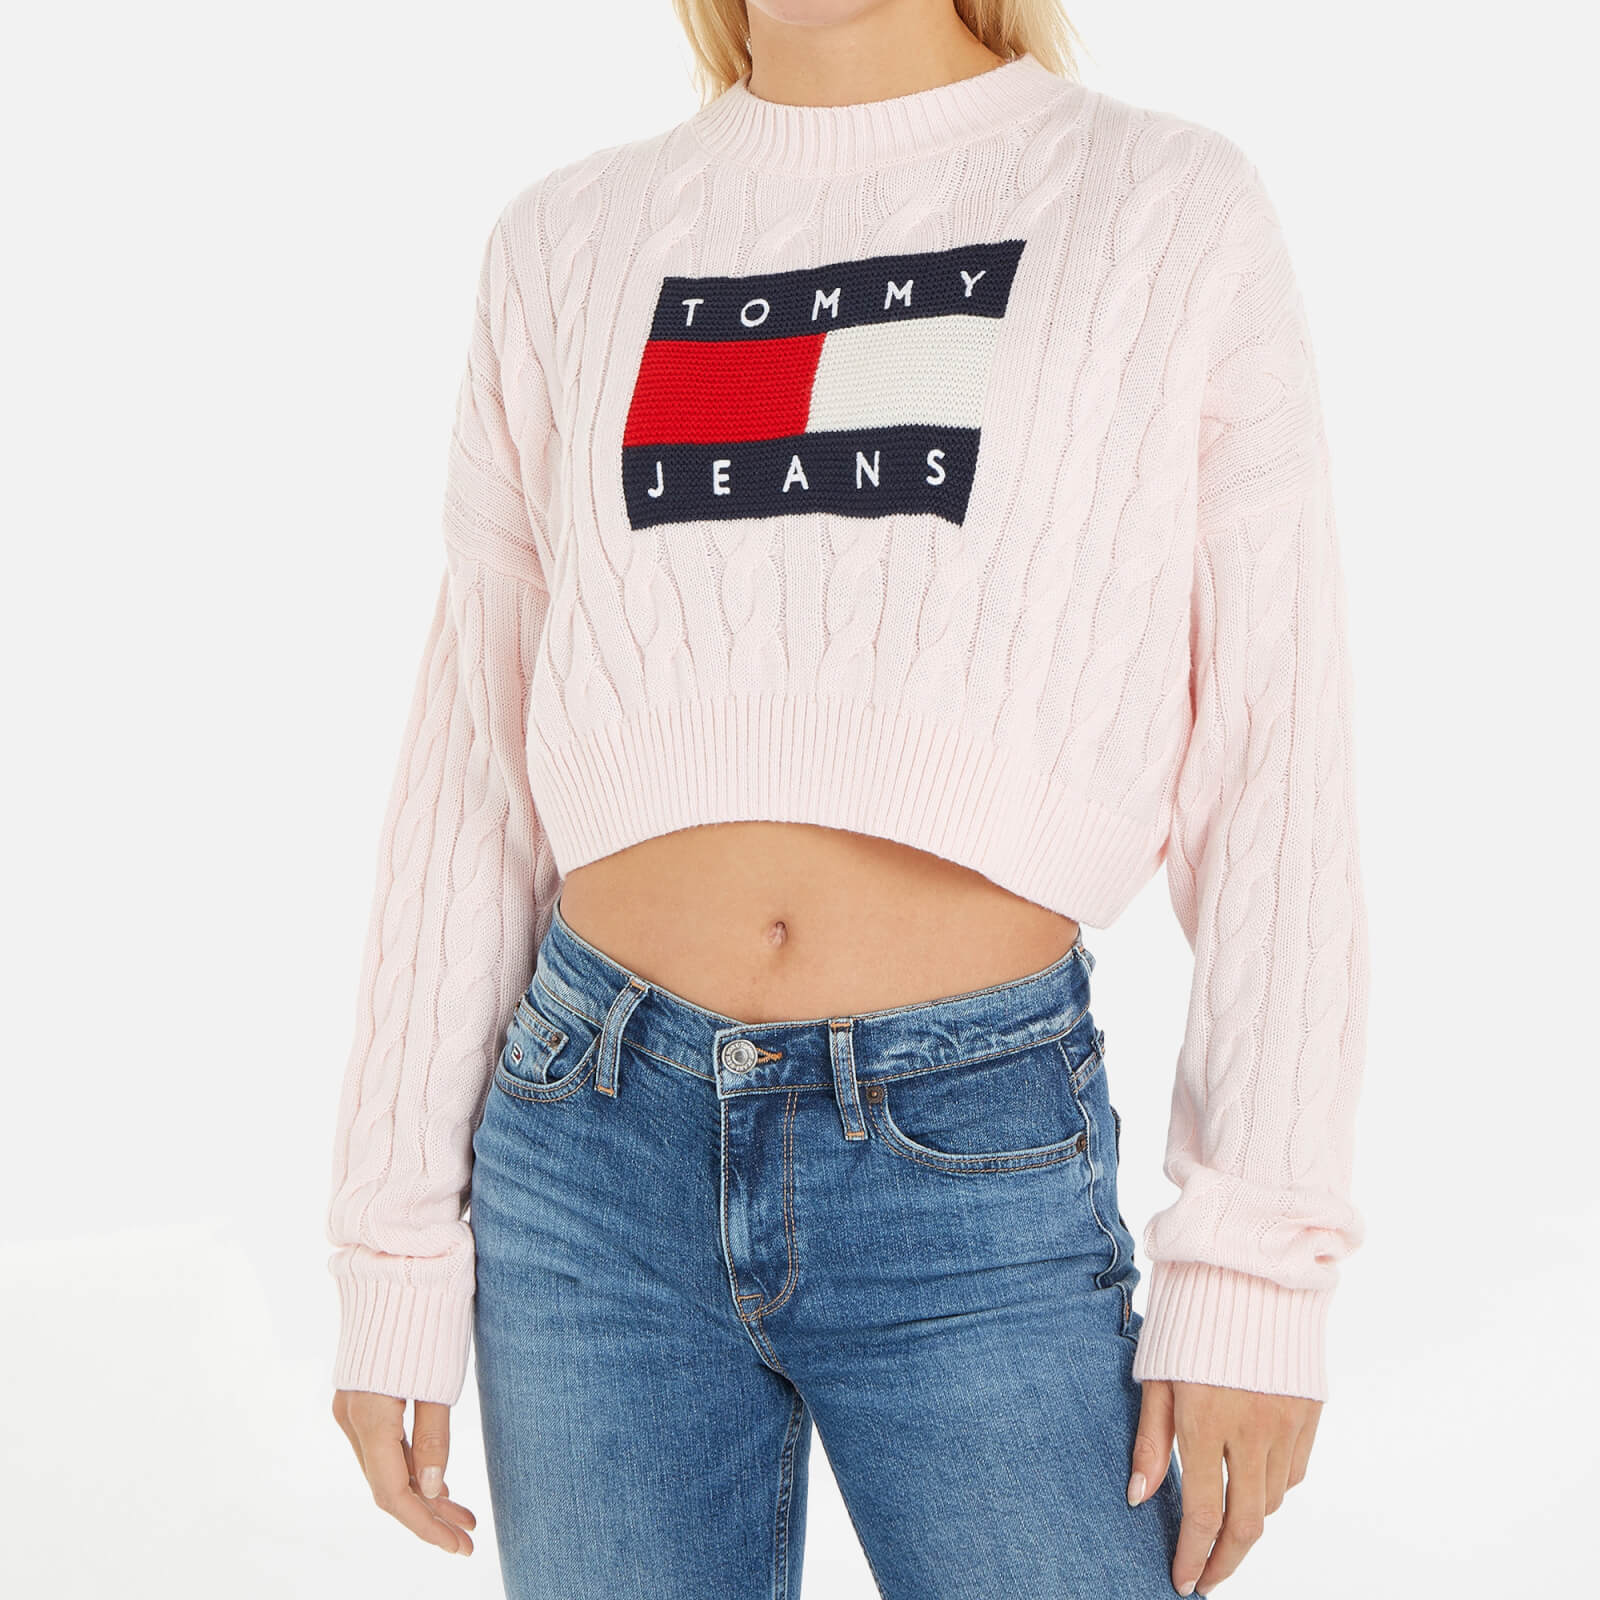 Tommy Jeans Flag Cable-Knit Sweater product